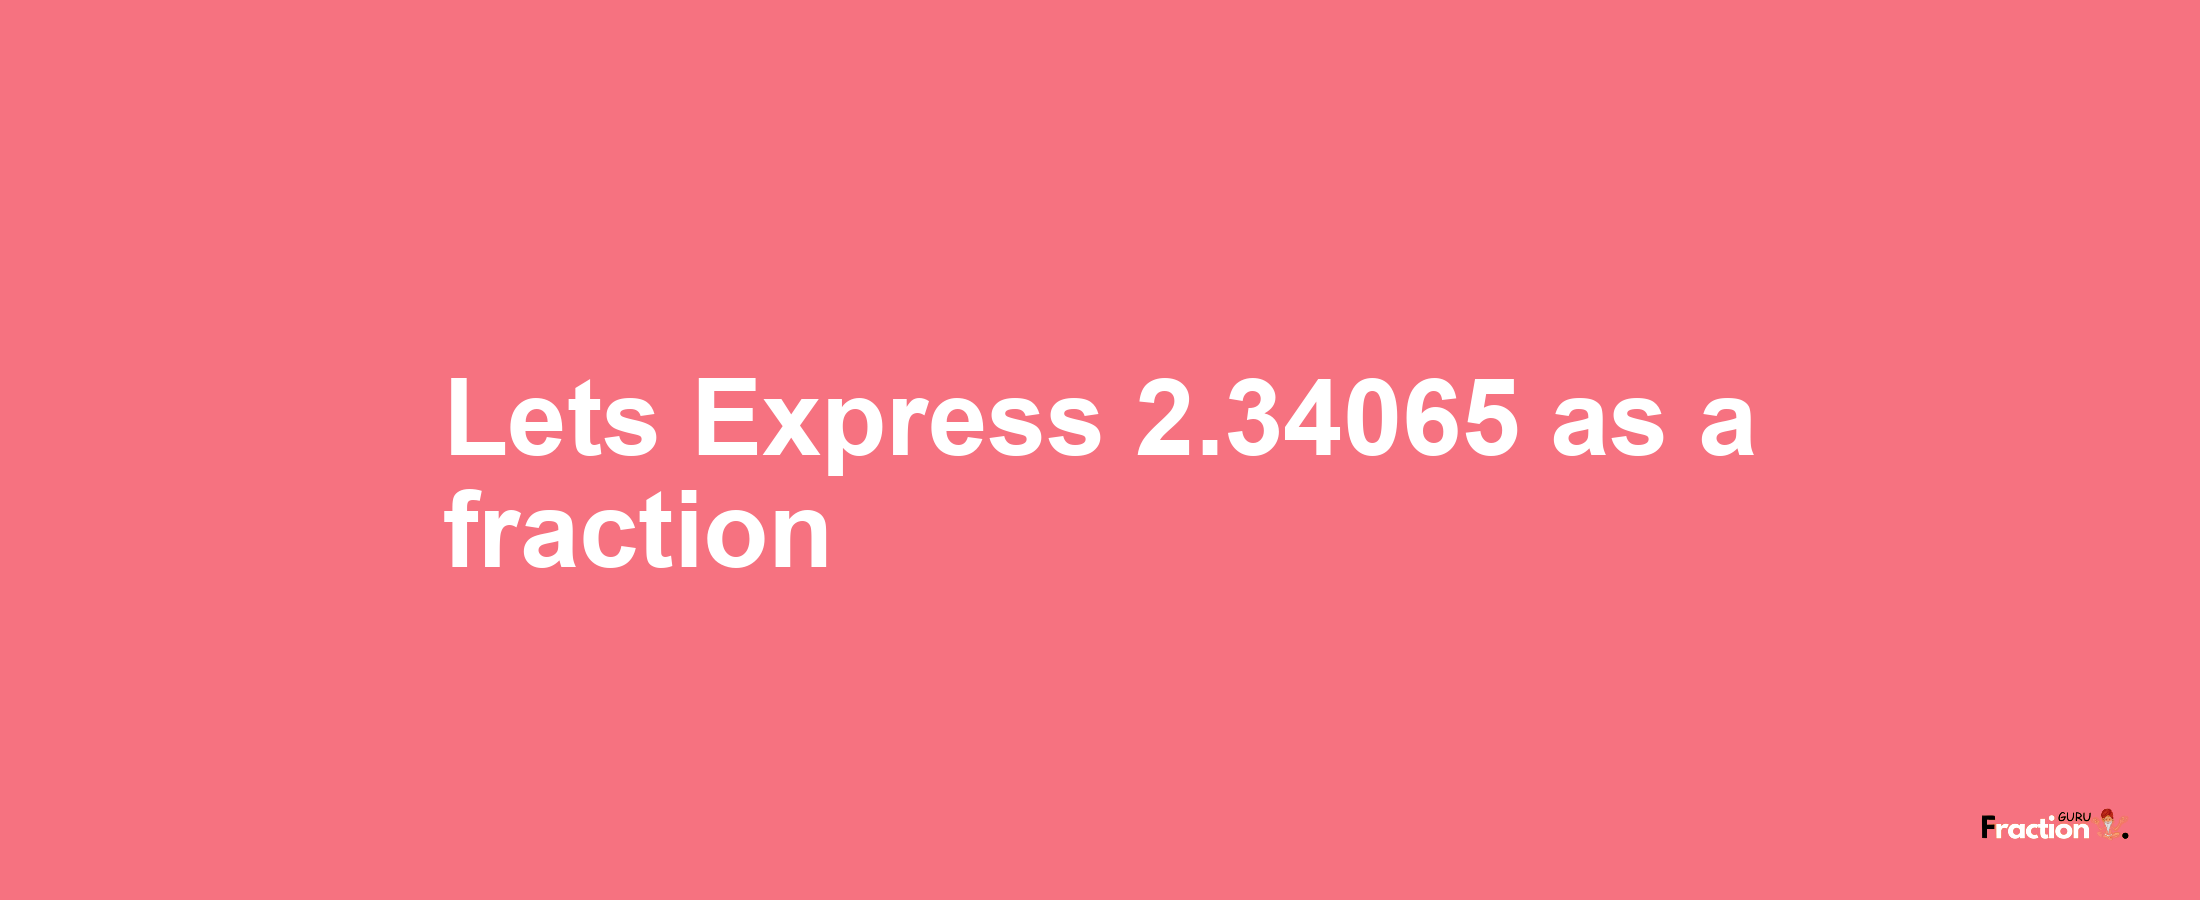 Lets Express 2.34065 as afraction